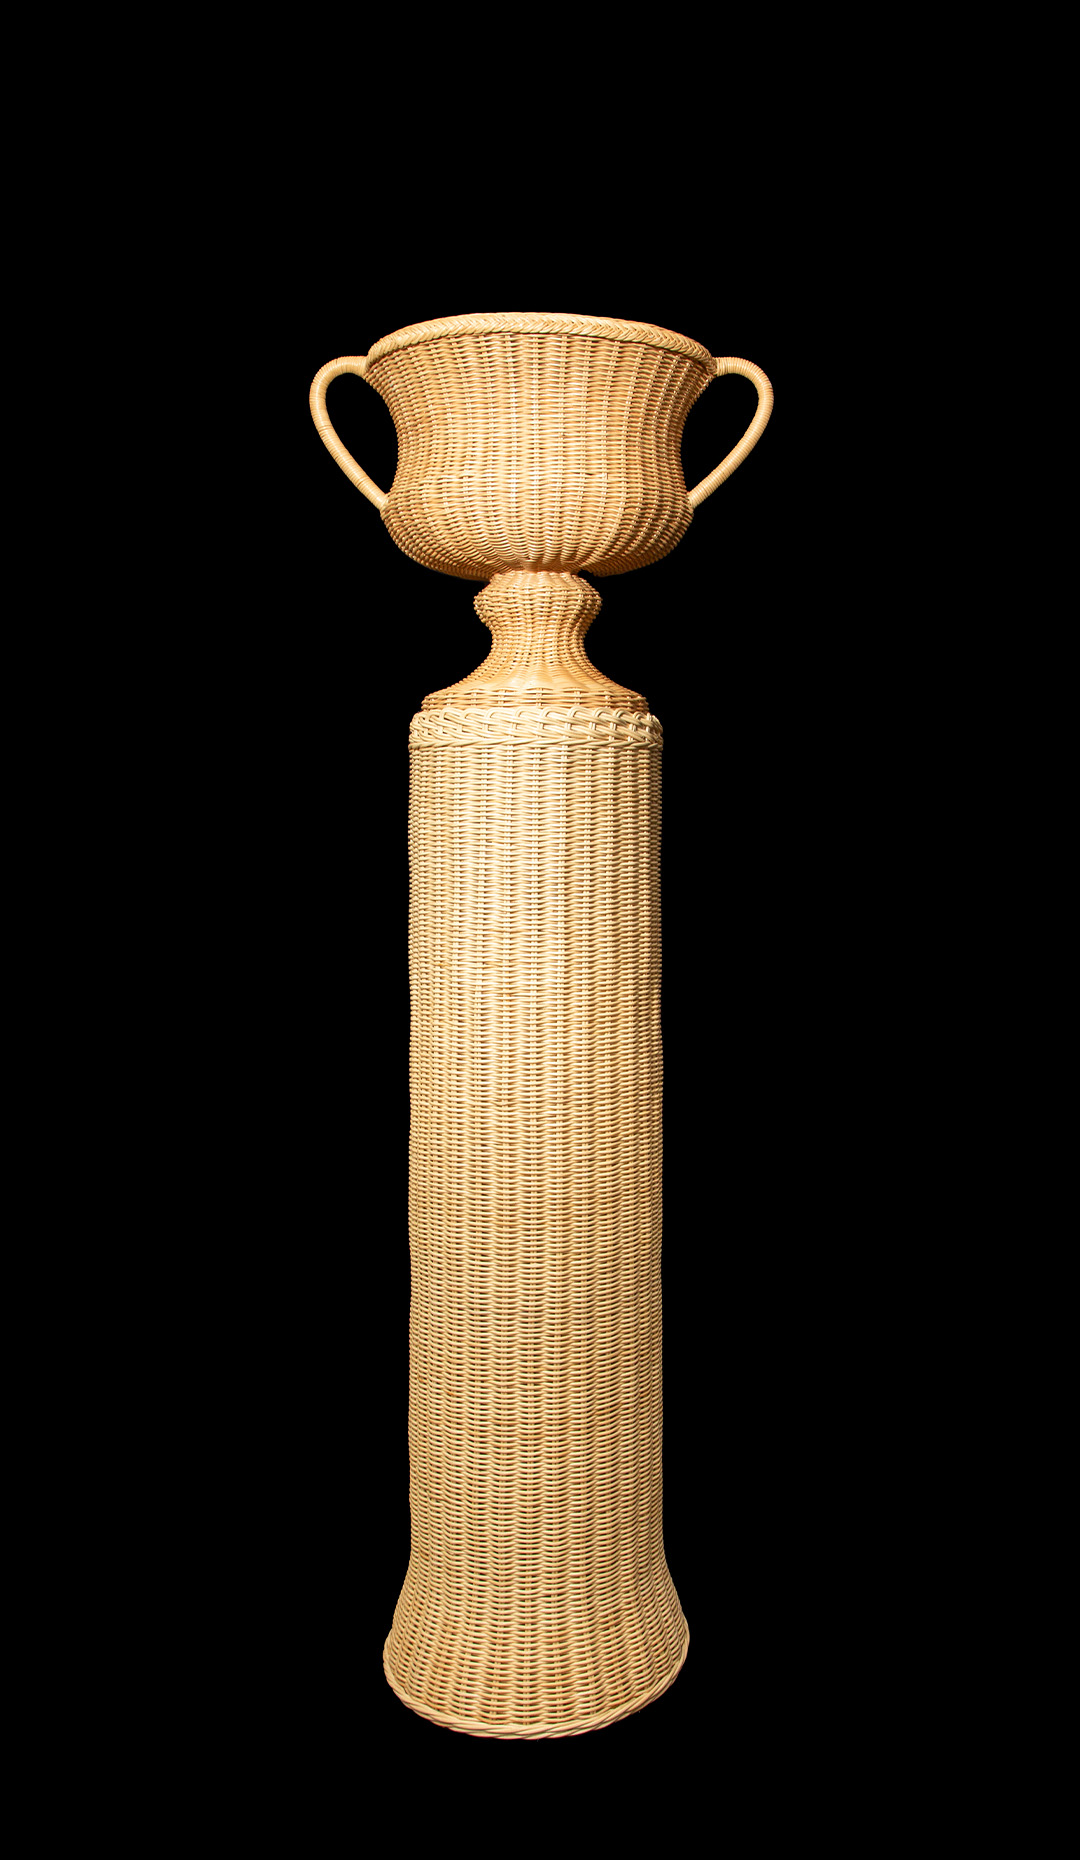 Tall Wicker Pedestal with Urn by Creel and Gow